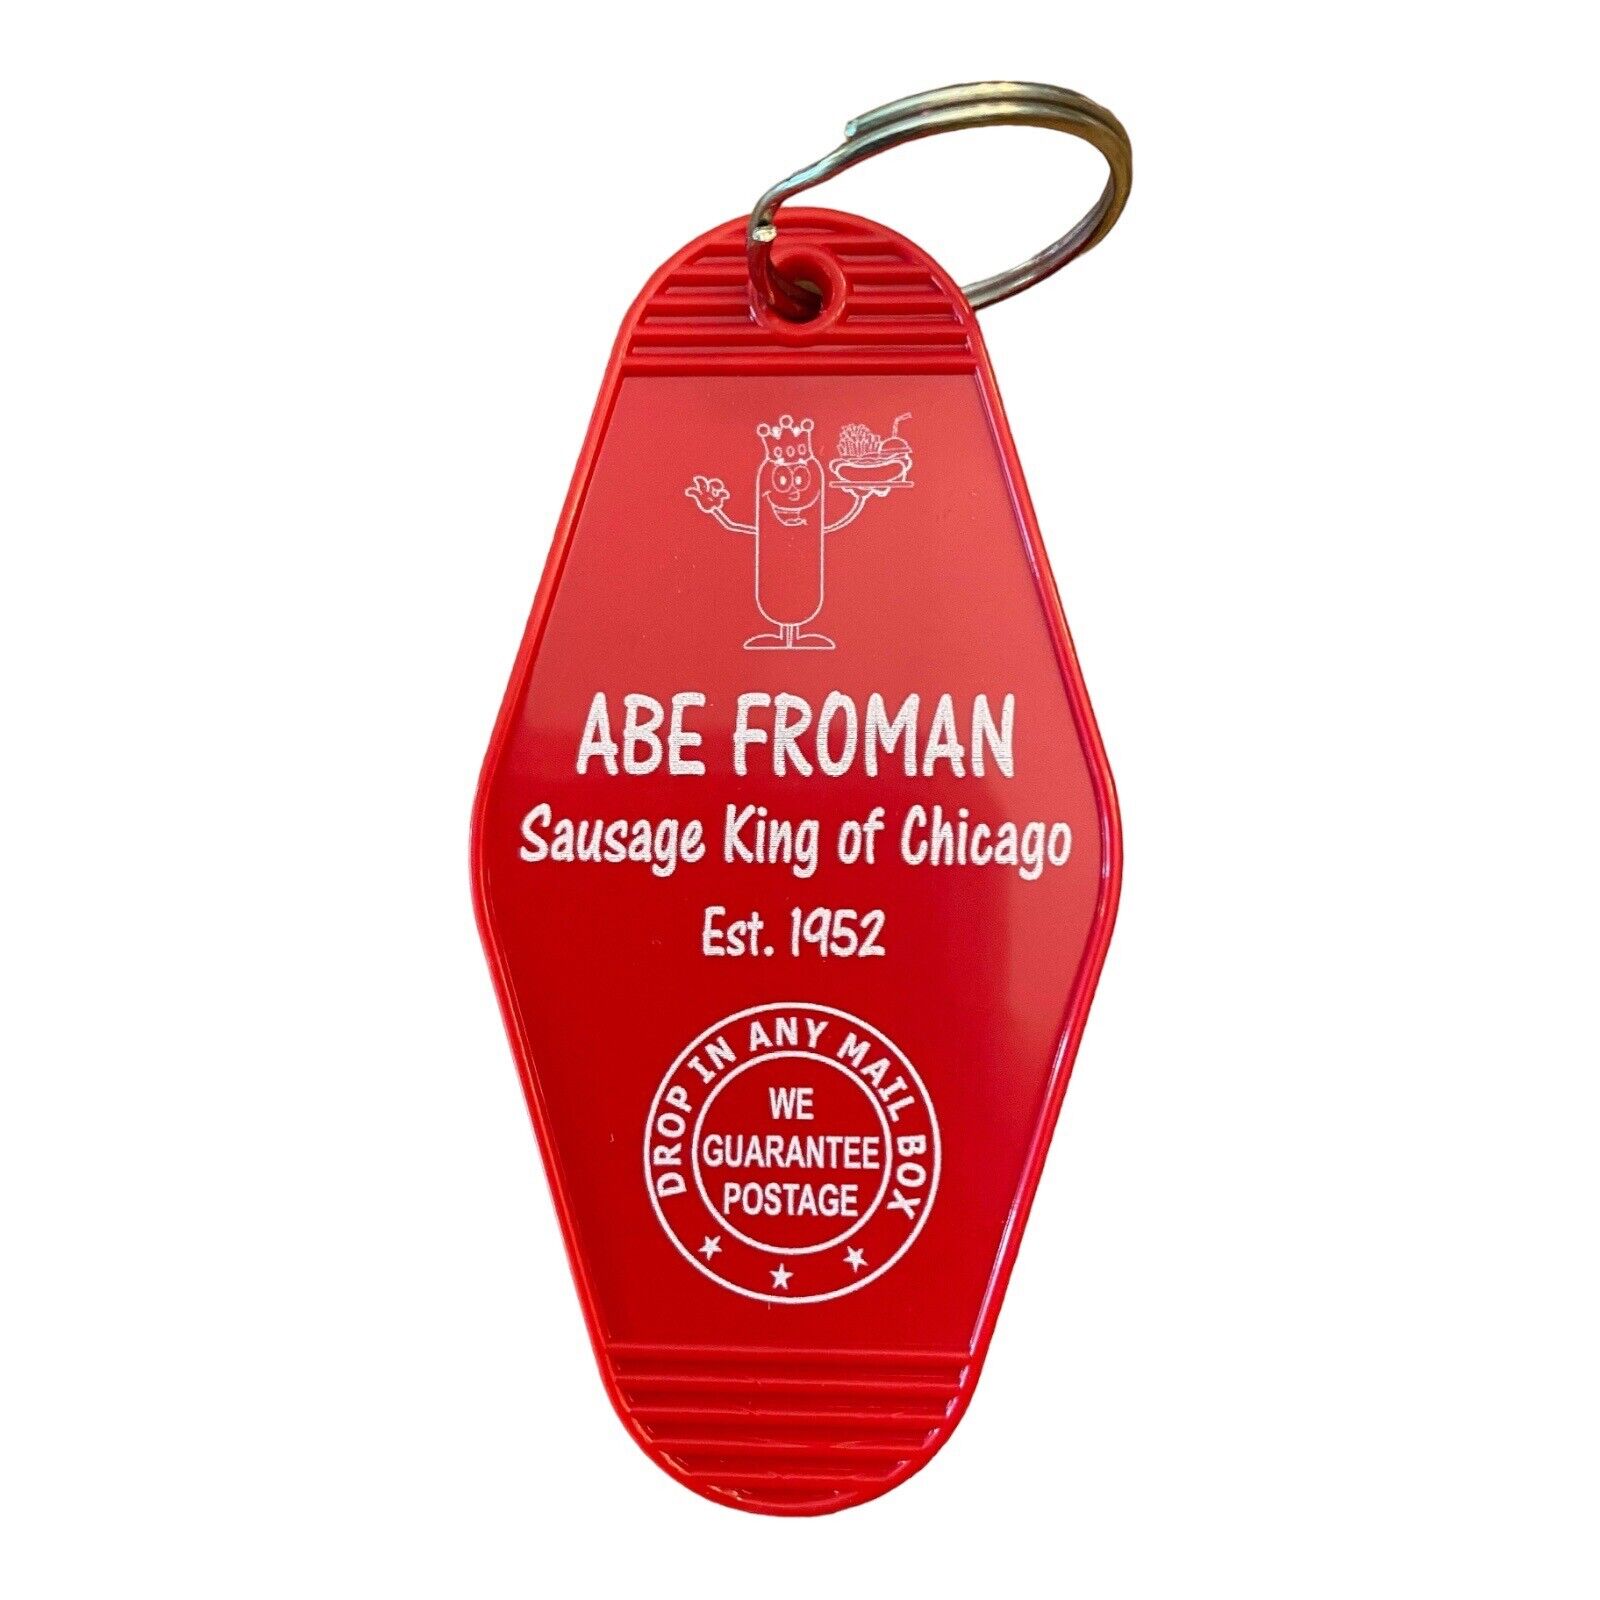 FERRIS BUELLER inspired Abe Froman Sausage King keytag